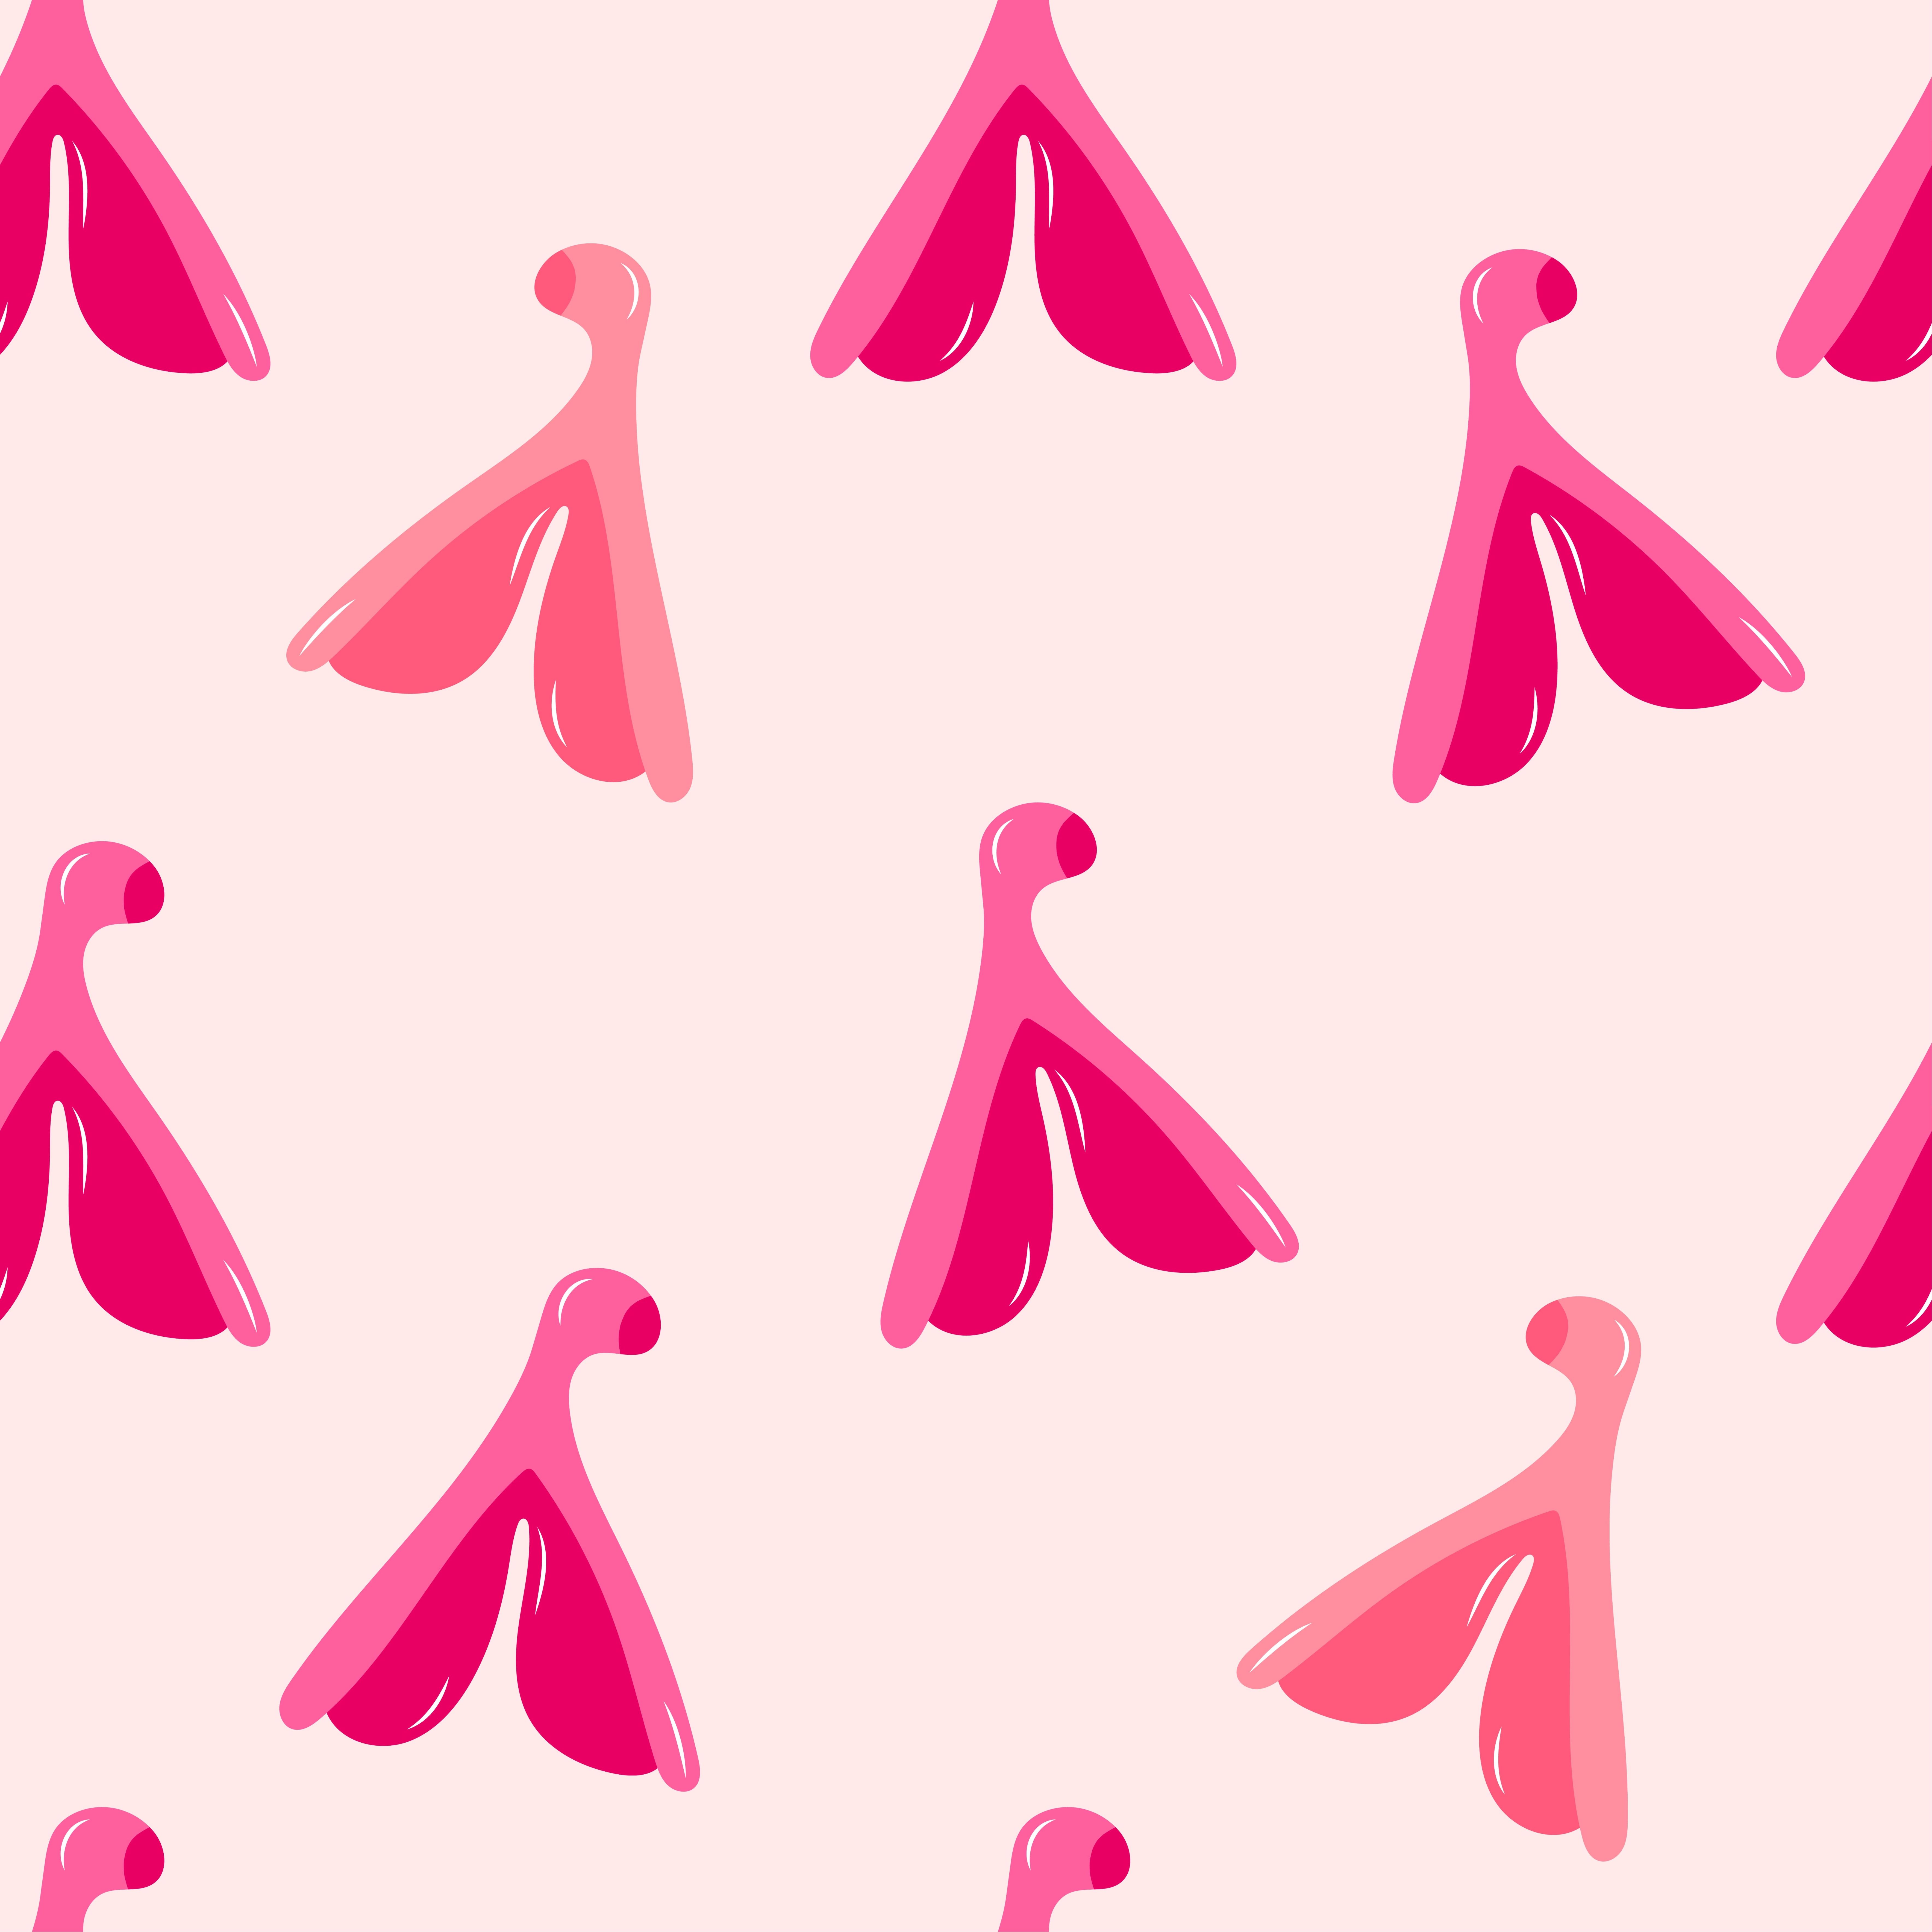 clitoris seamless pattern, structure of the clitoris, hand drawn drawn pink background